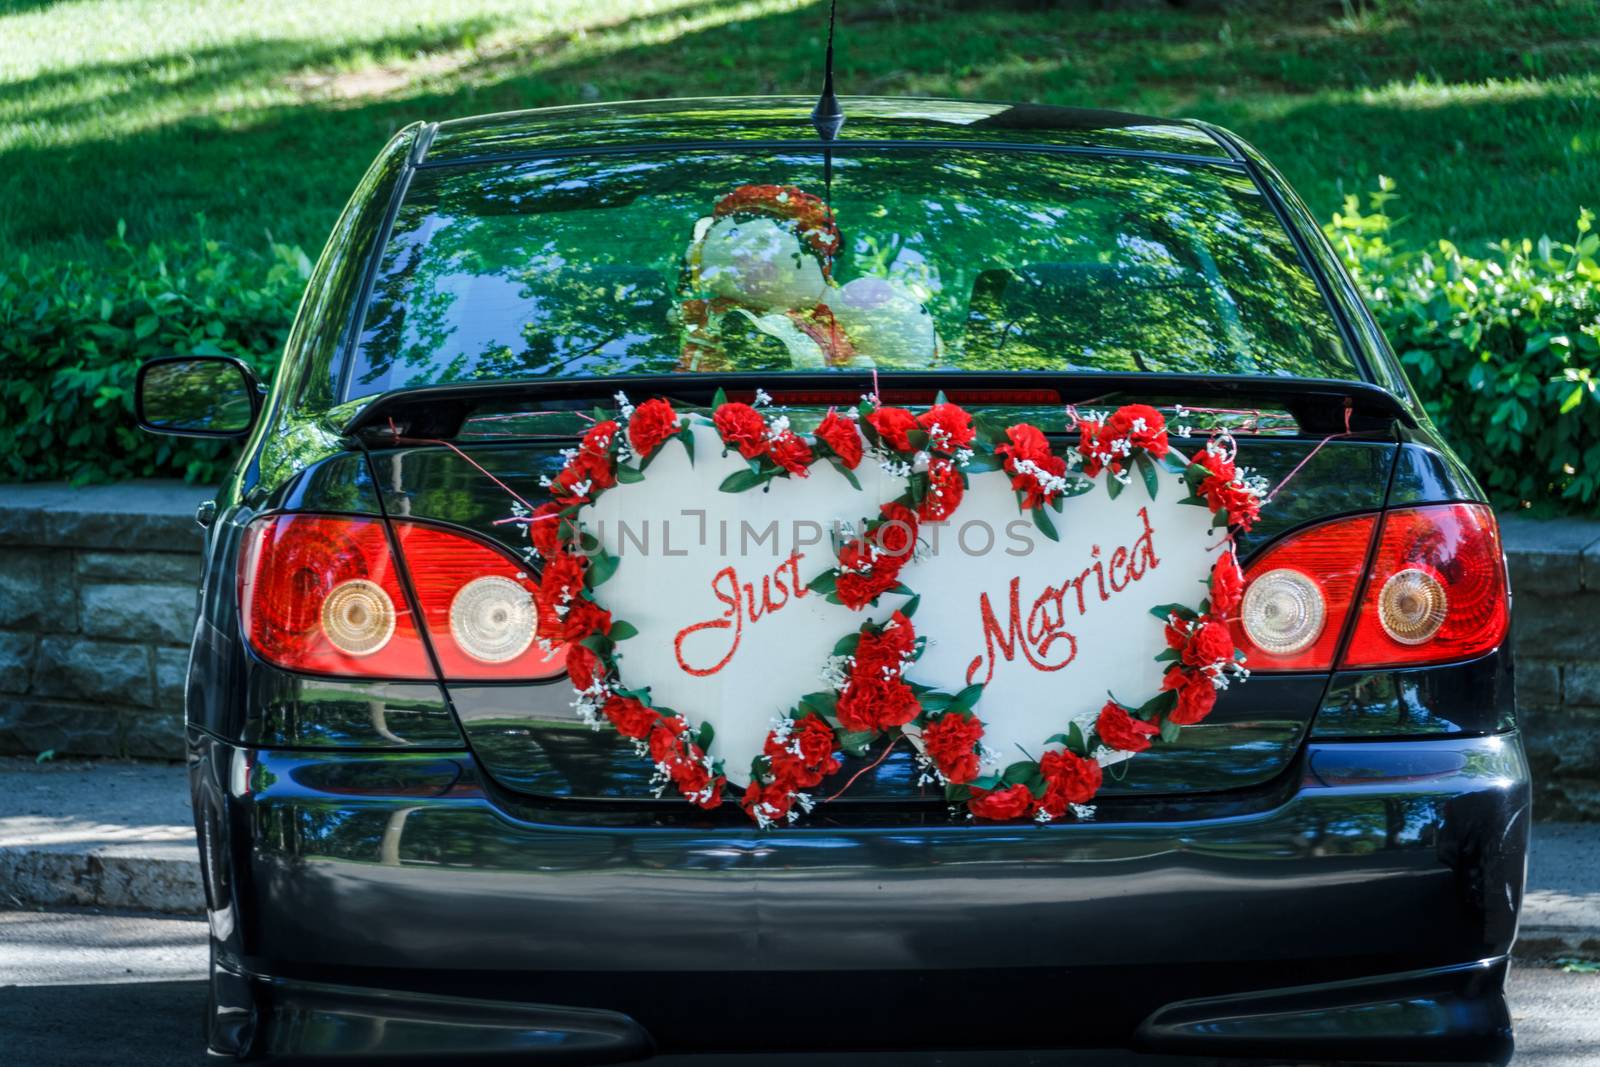 A "Just Married" sign at the back of a car waiting for the newlywed couple